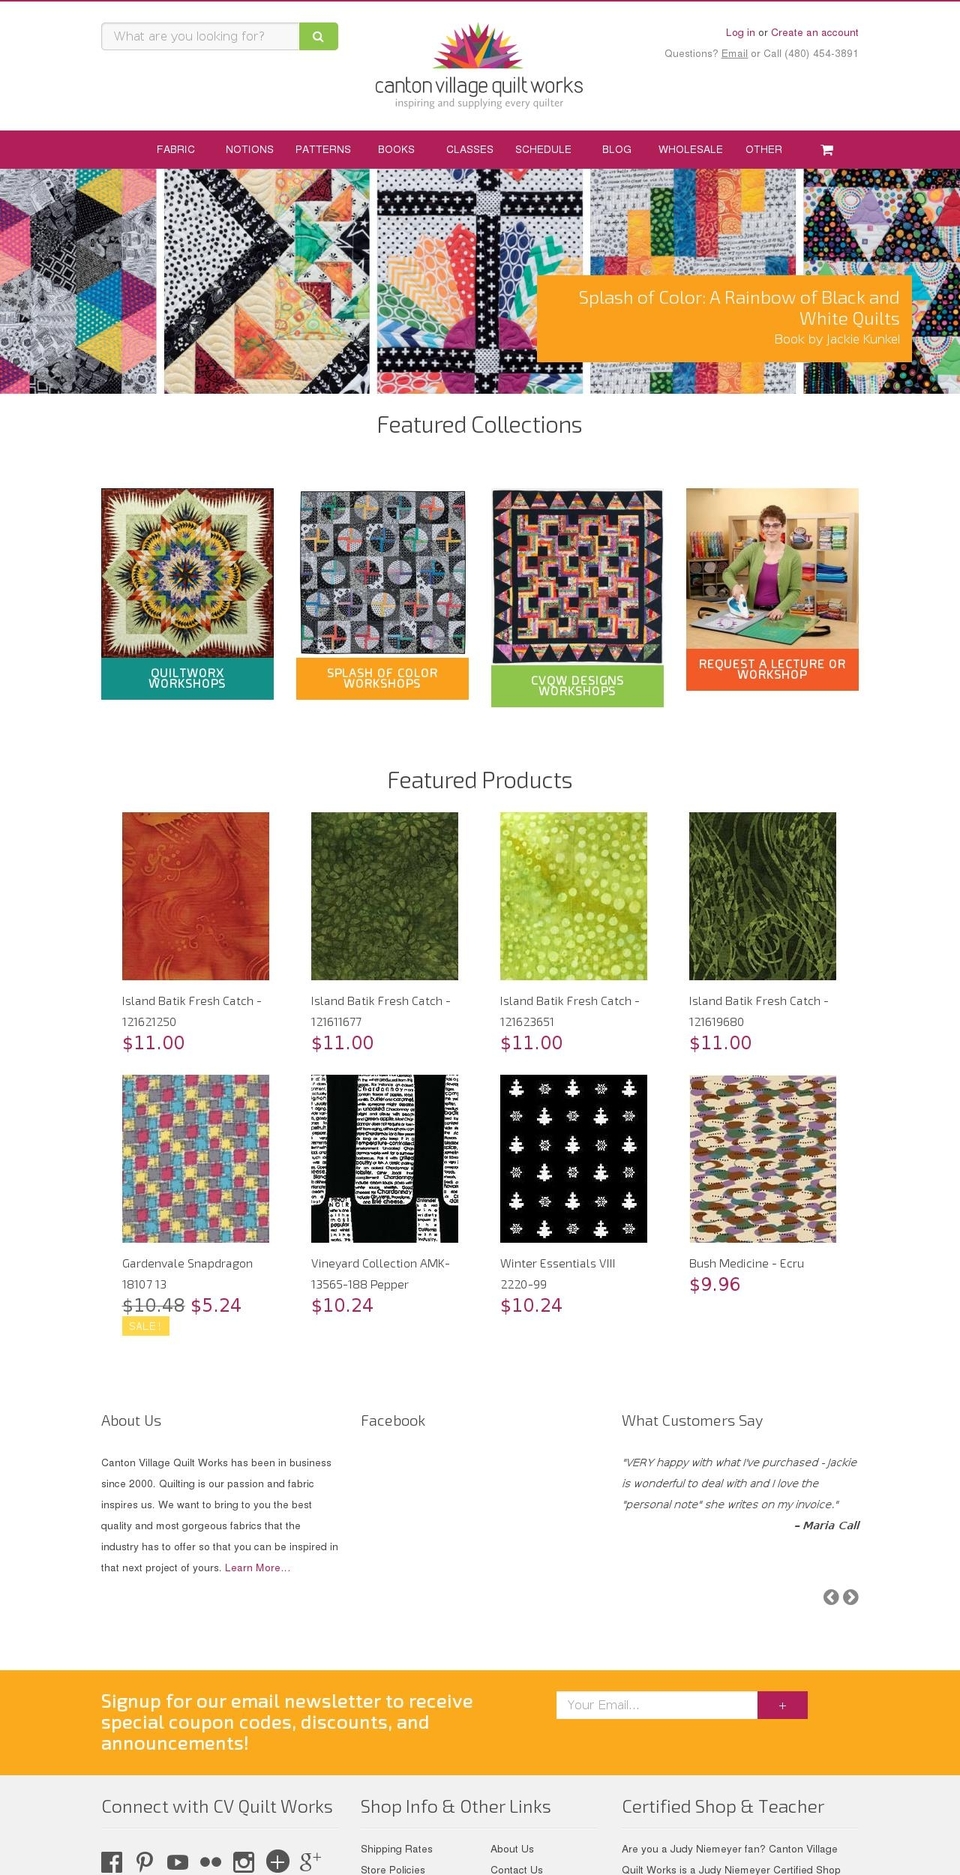 August Shopify theme site example cvquiltworks.com